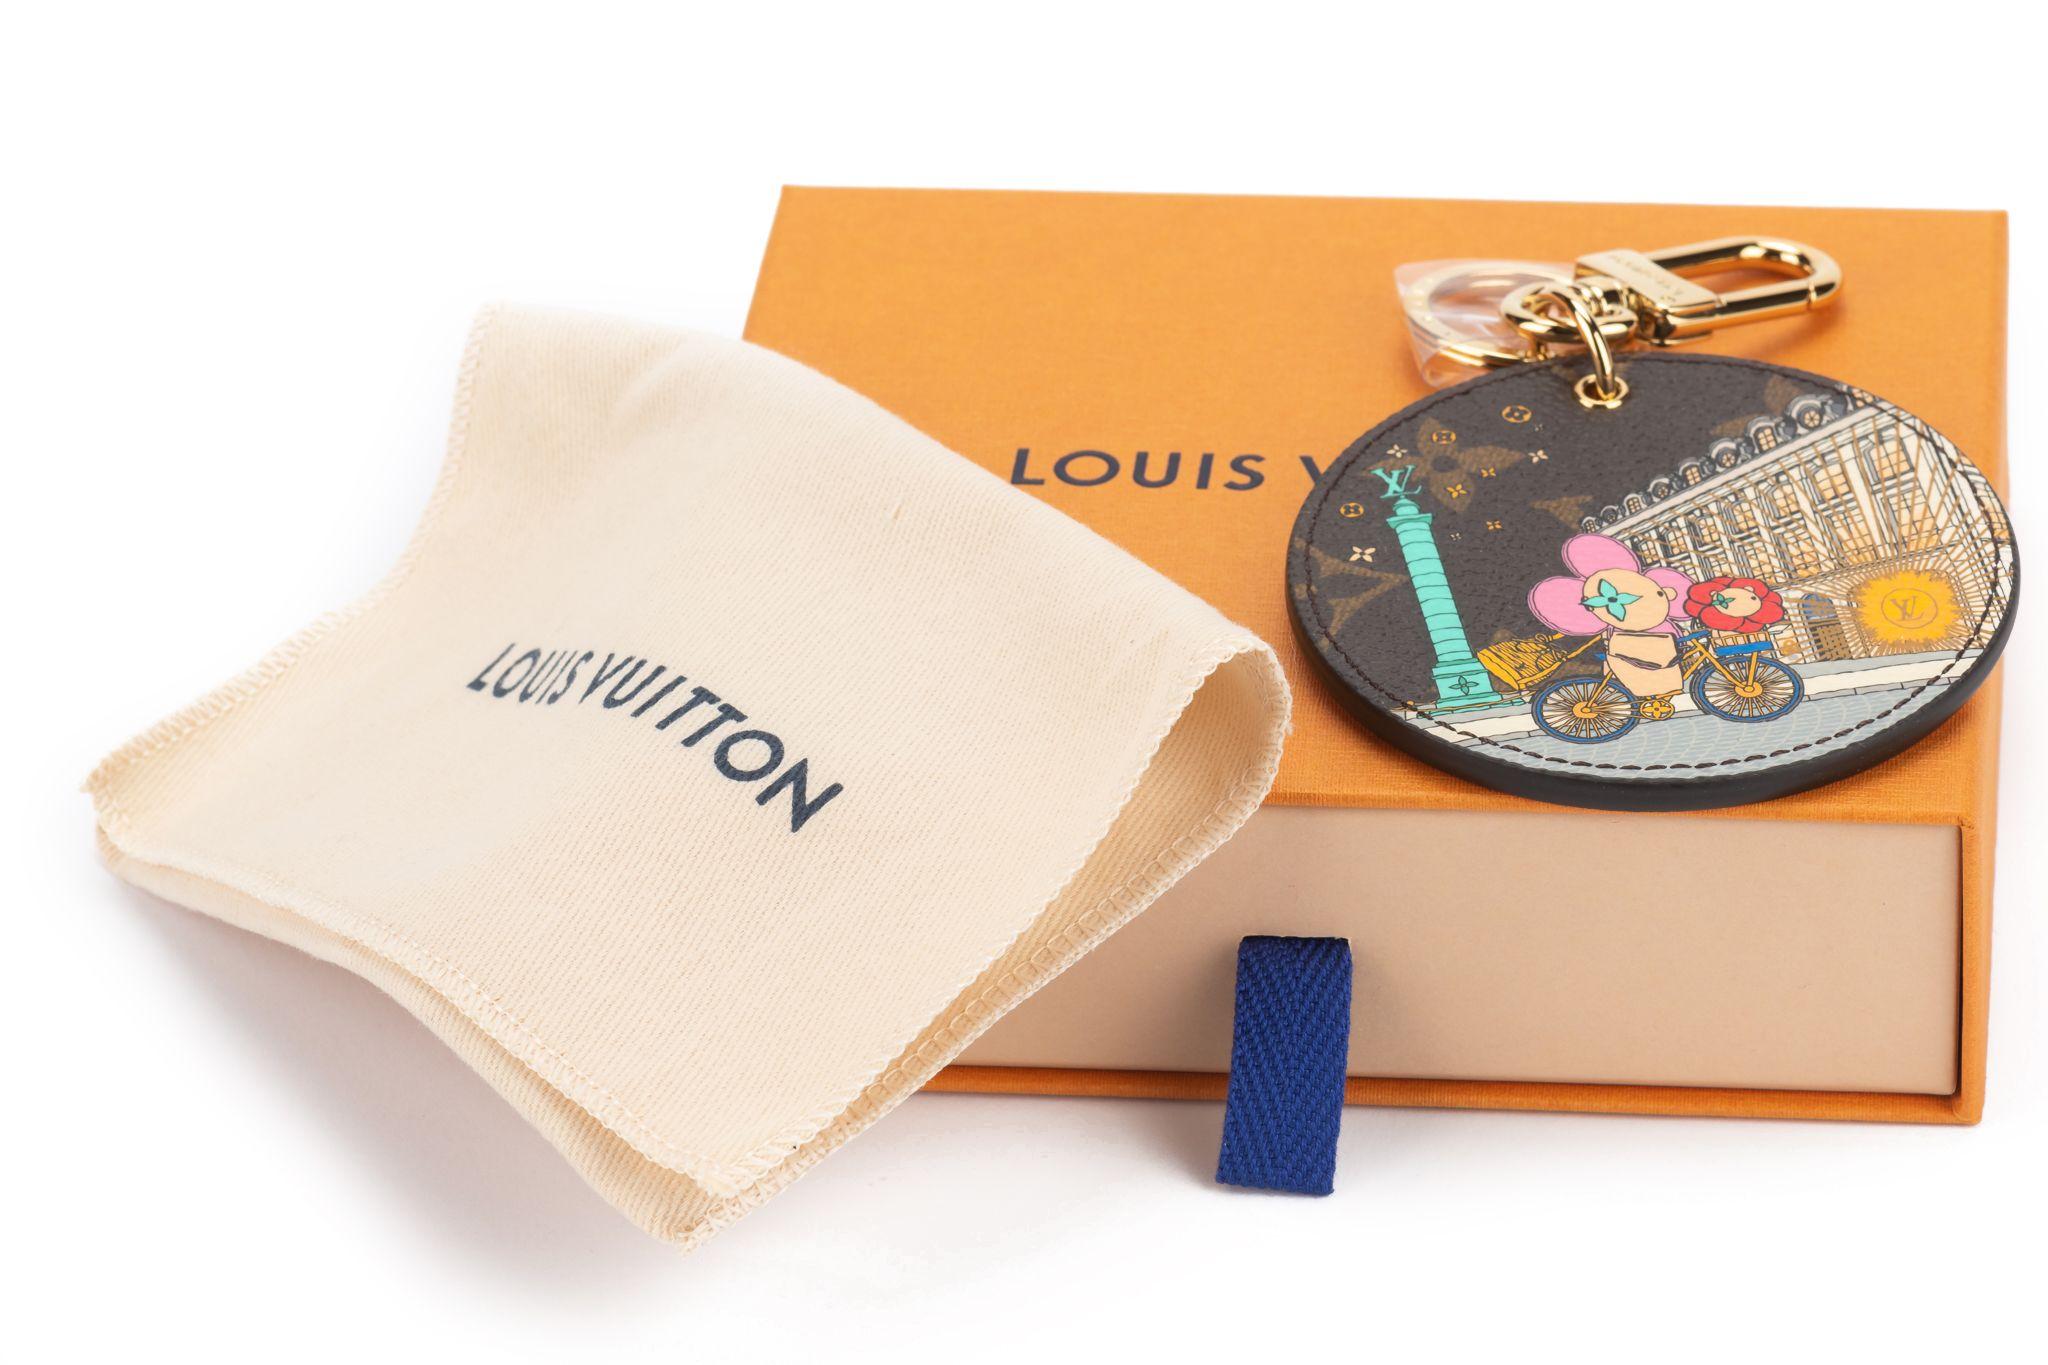 Louis Vuitton Key Ring belongs to the Vivienne Holidays 2022 collection. It's brand new and comes with the original dustcover and box.